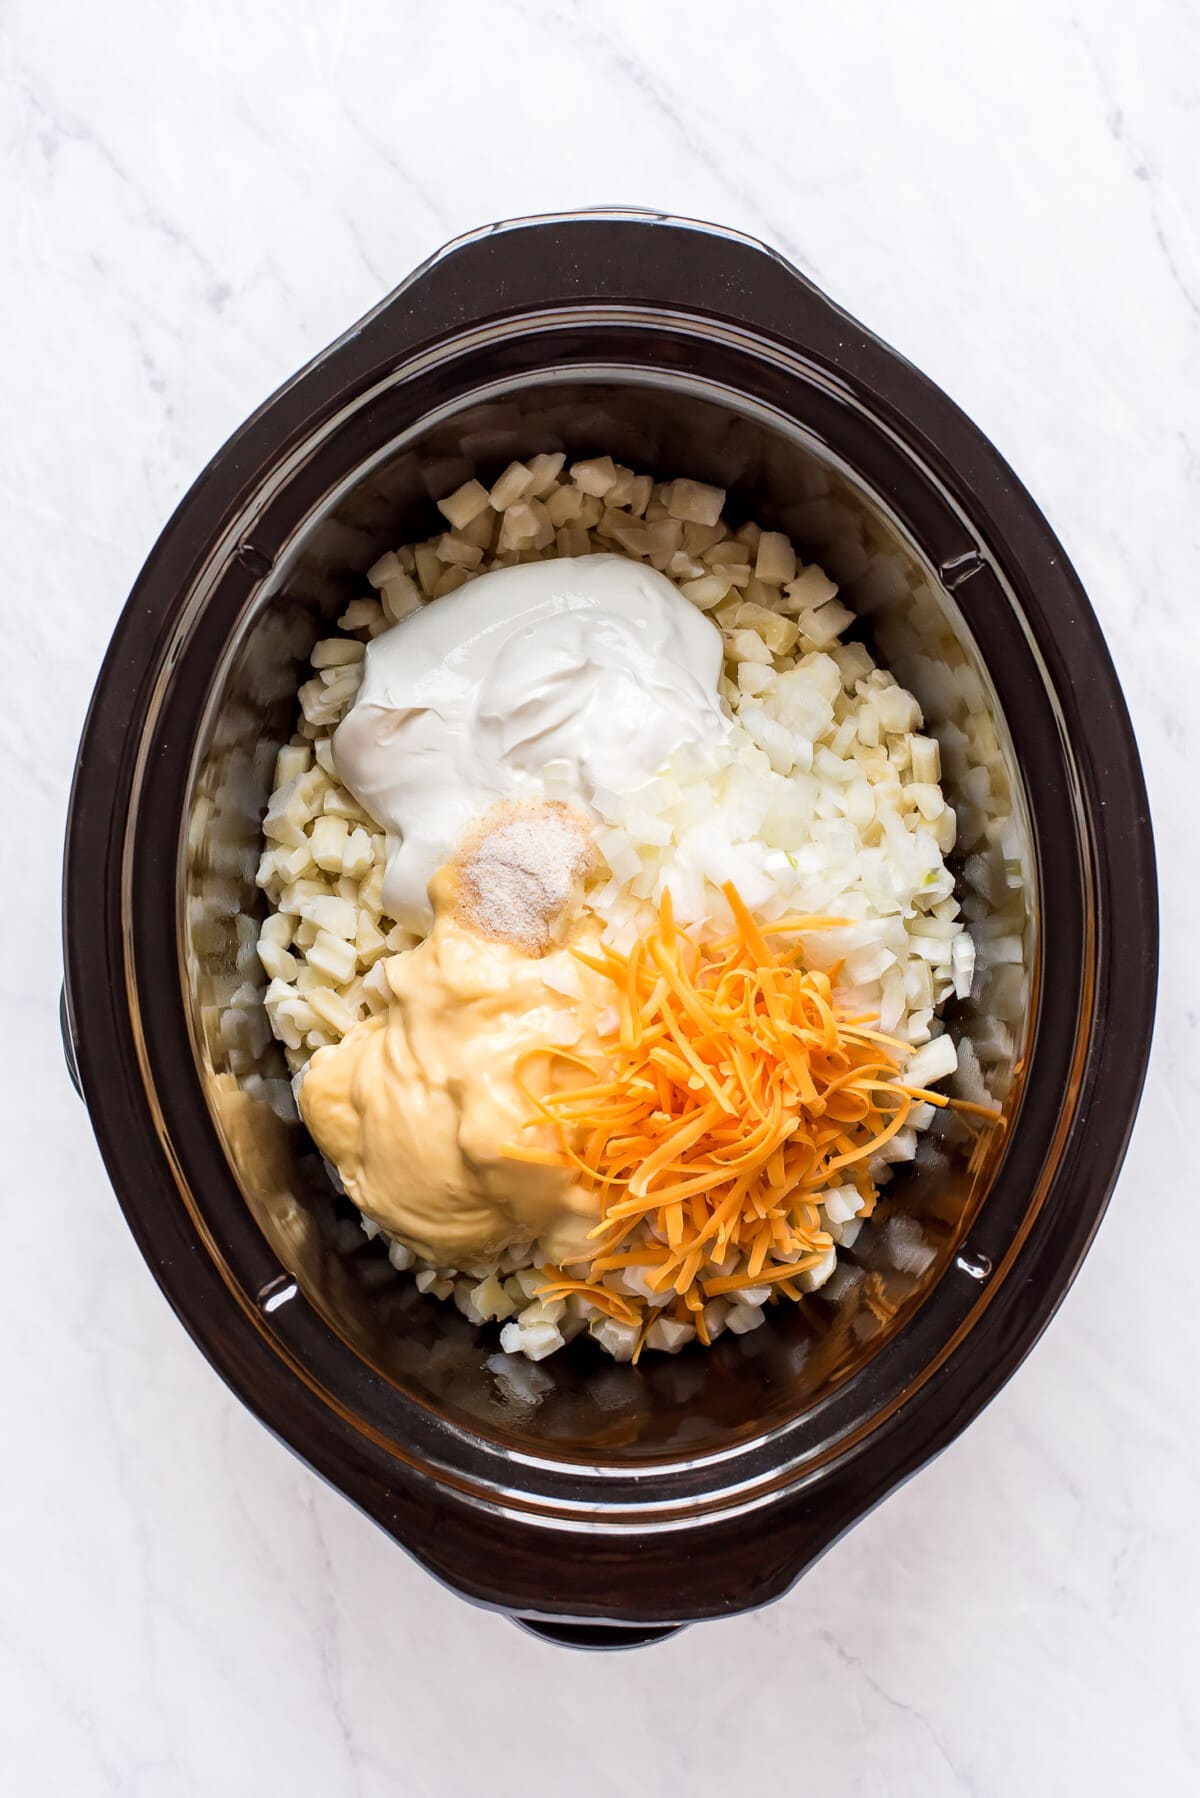 Combining hash browns, sour cream, condensed soup, and cheese in a crock pot.